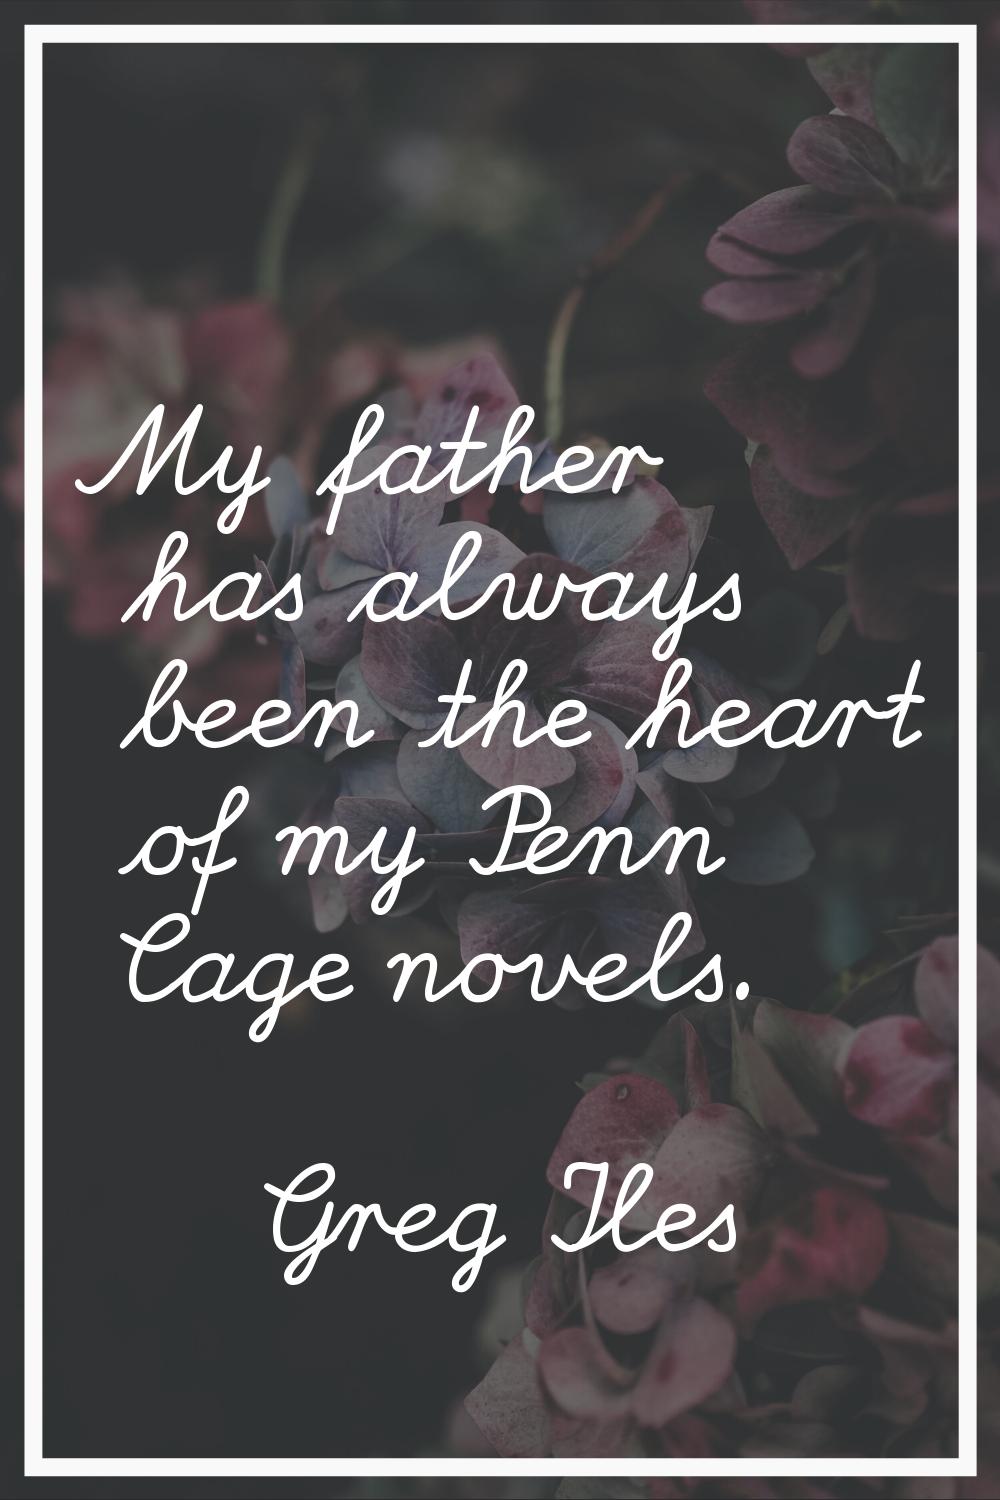 My father has always been the heart of my Penn Cage novels.